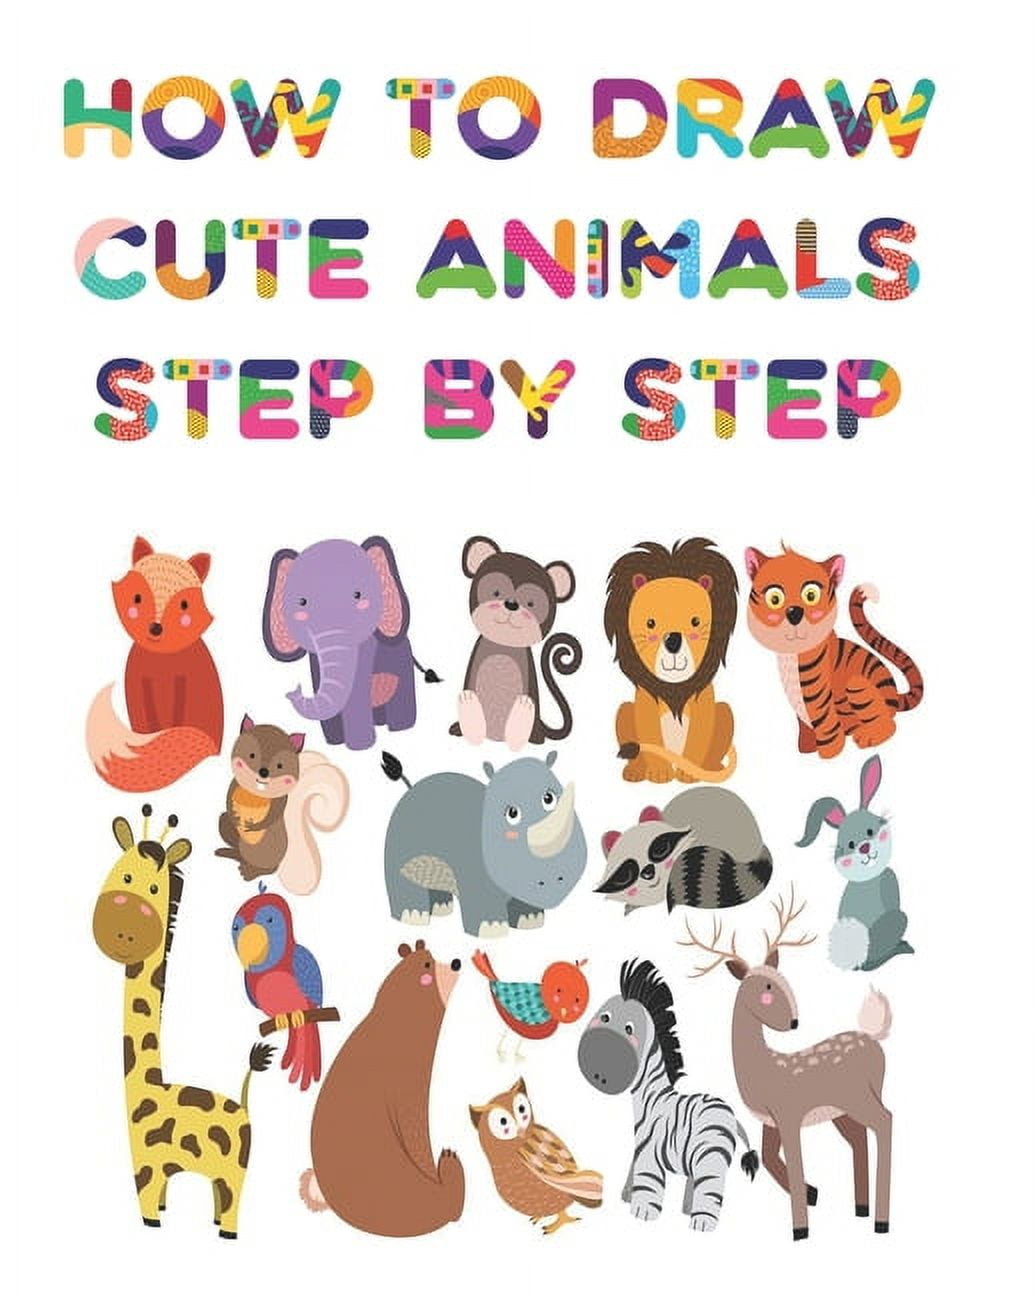 Learn How To Draw Kawaii Animals Easy Step-By-Step Drawing Guide